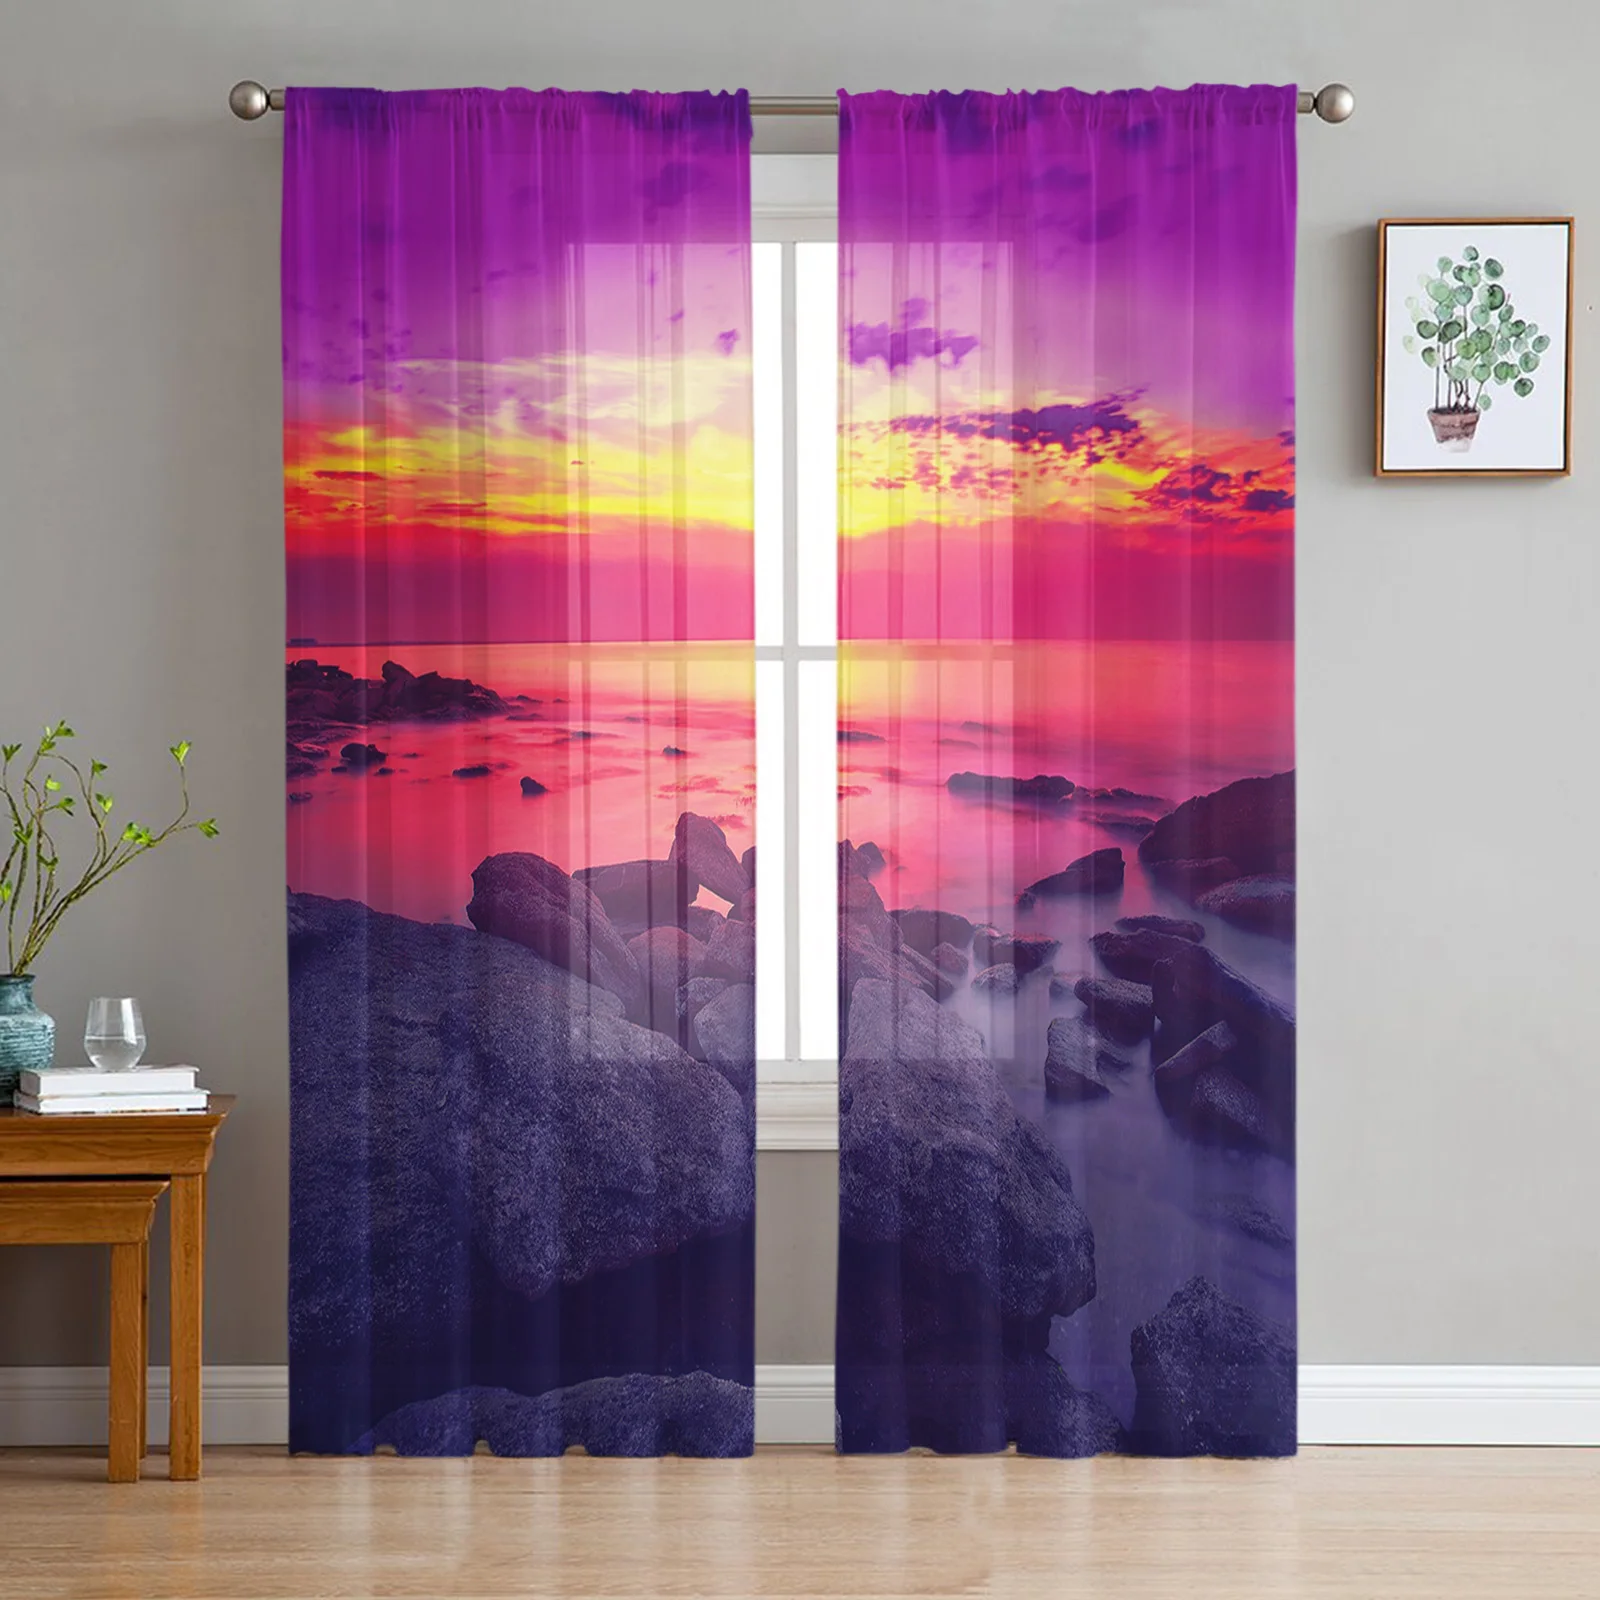 Seaside Beach Sunset Dusk Tulle Curtains for Living Room Bedroom Decor Transparent Chiffon Sheer Voile Window Curtain